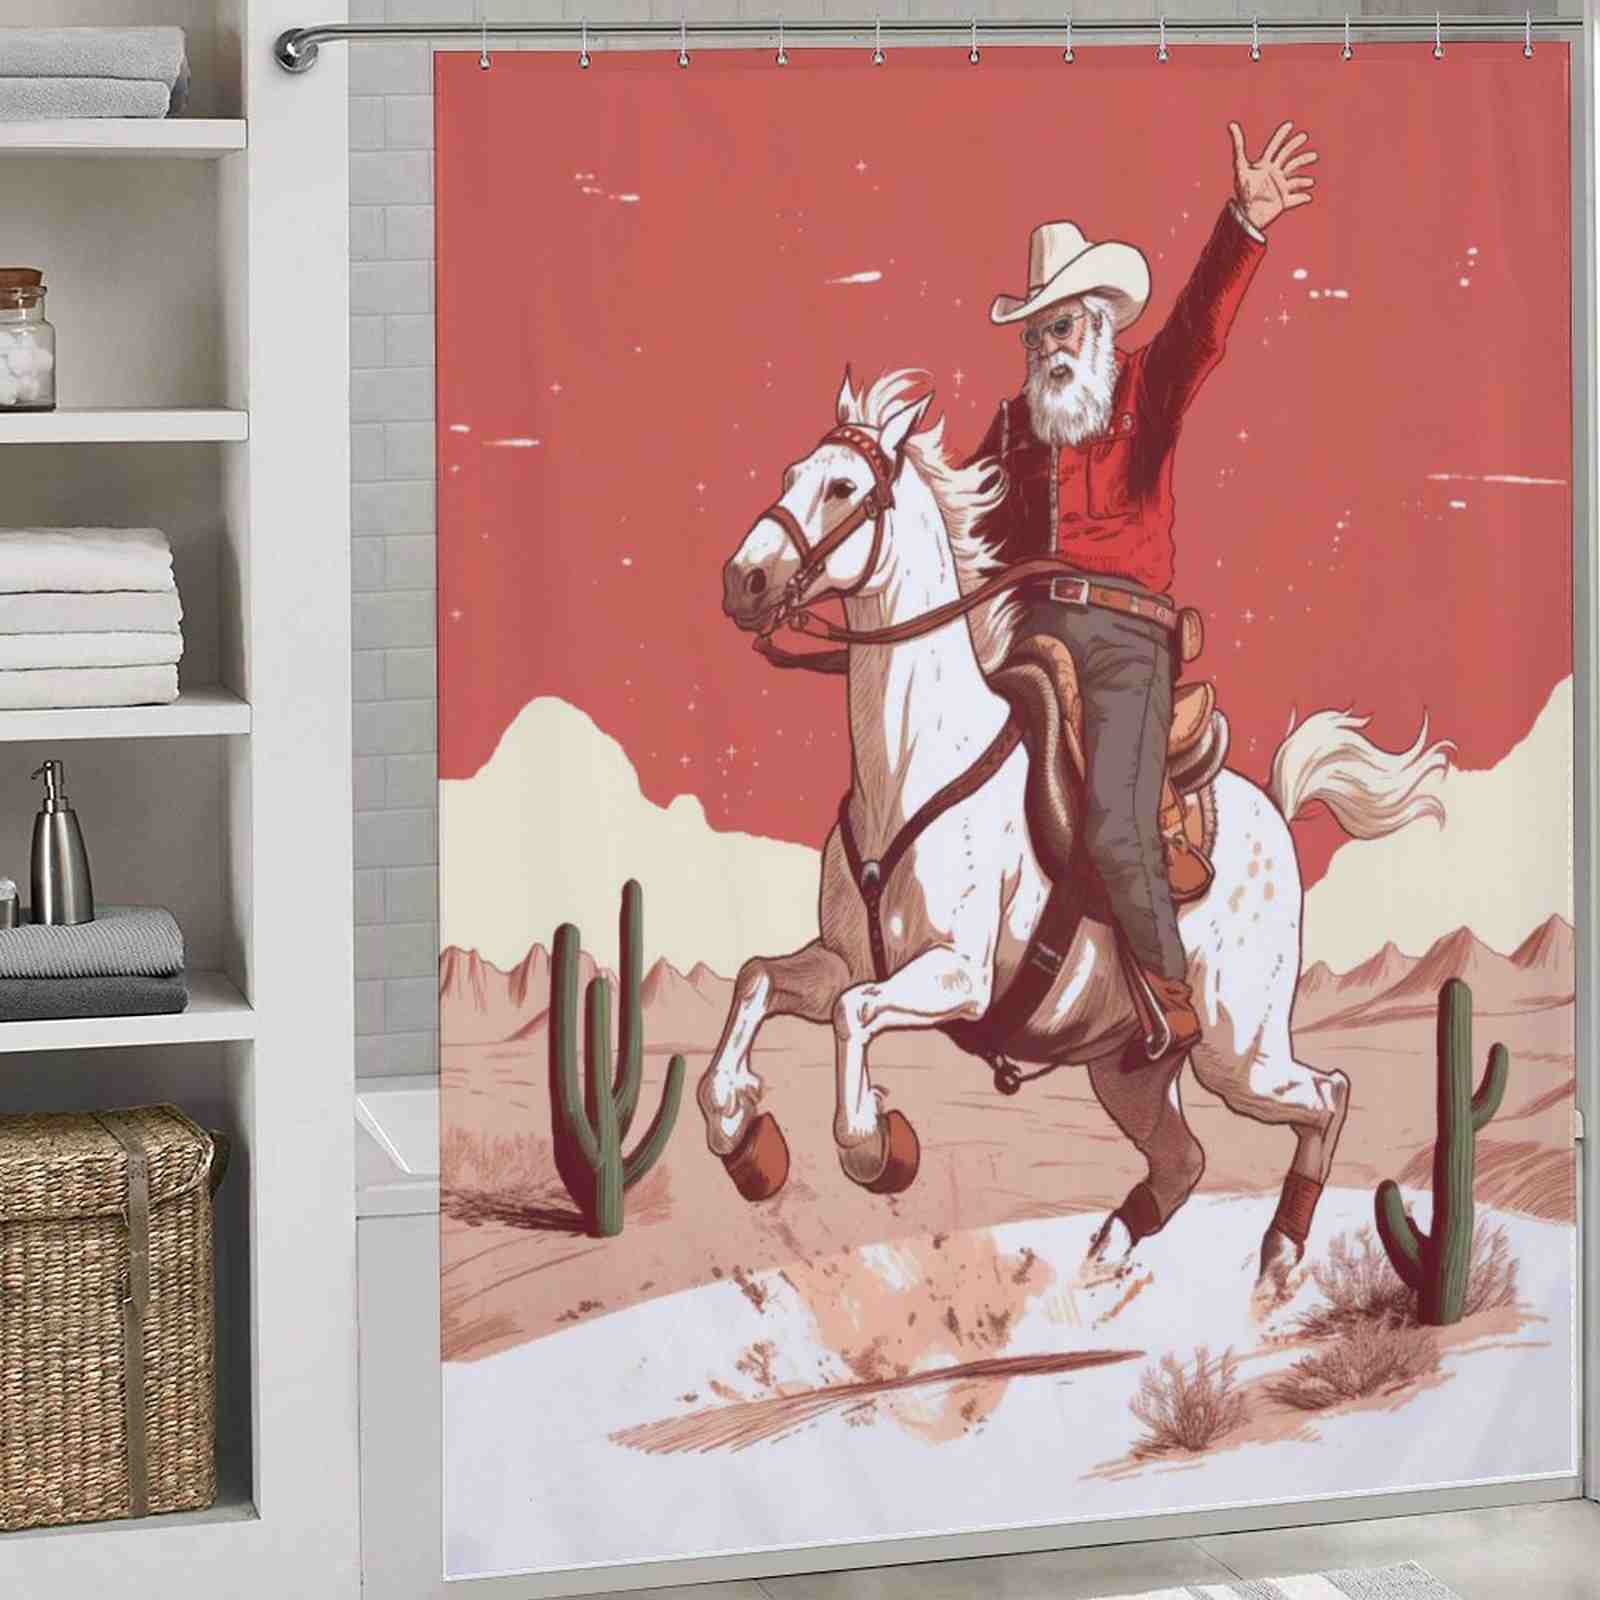 A Rustic Cowboy Santa Claus Shower Curtain featuring Santa Claus on a horse, perfect for the holiday season by Cotton Cat.